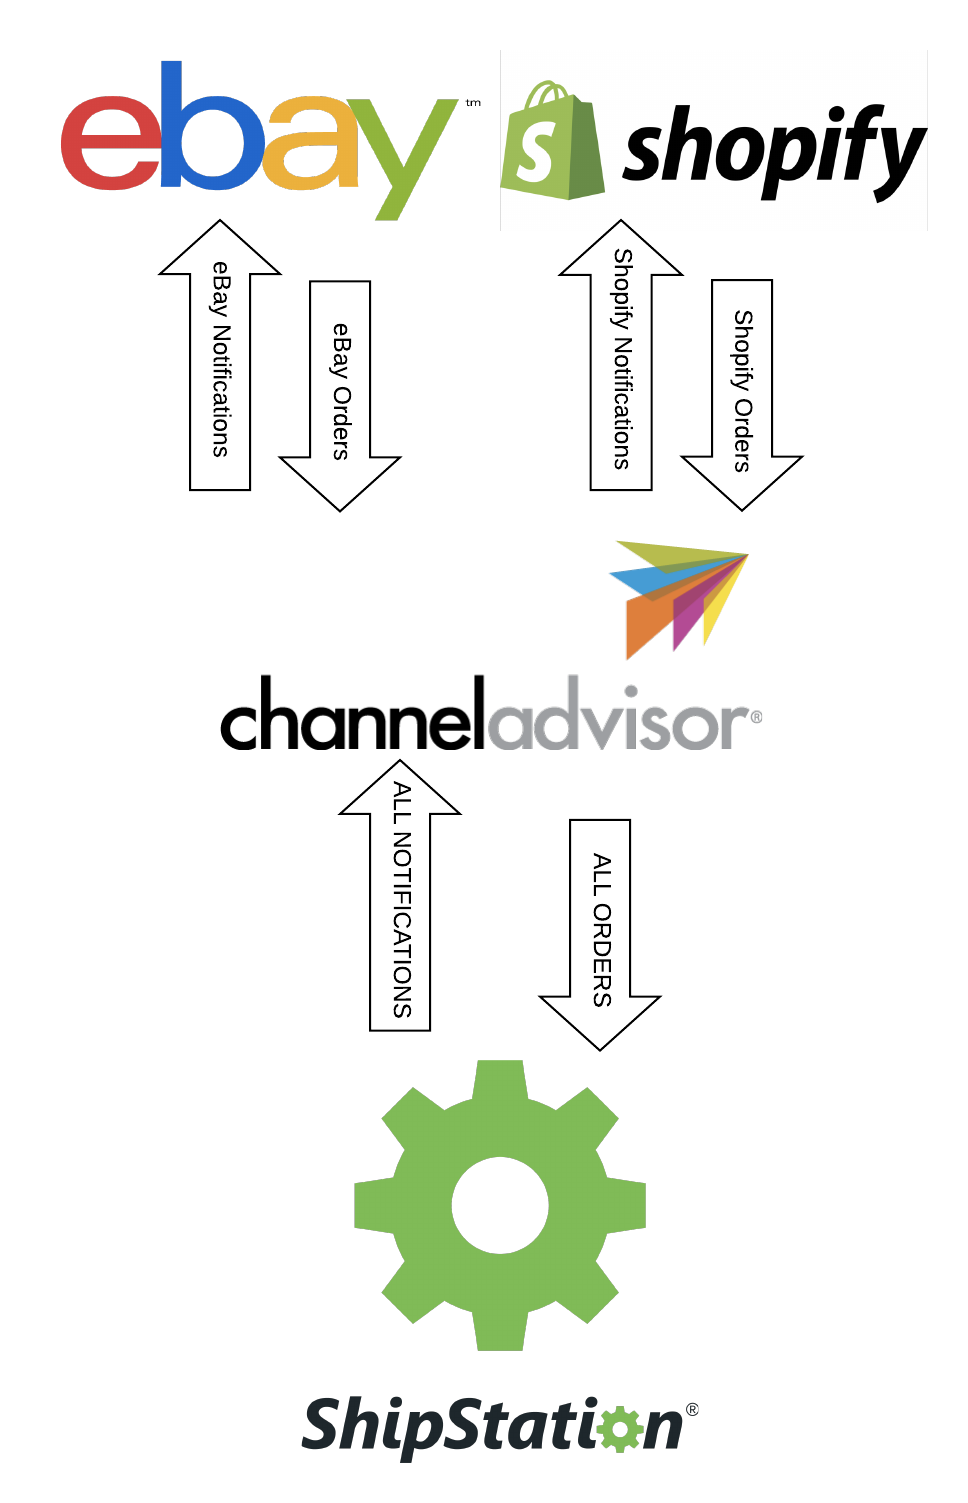 Store orders flow into ChannelAdvisor, then into ShipStation. Notifications flow back to Channel Advisor, then stores.